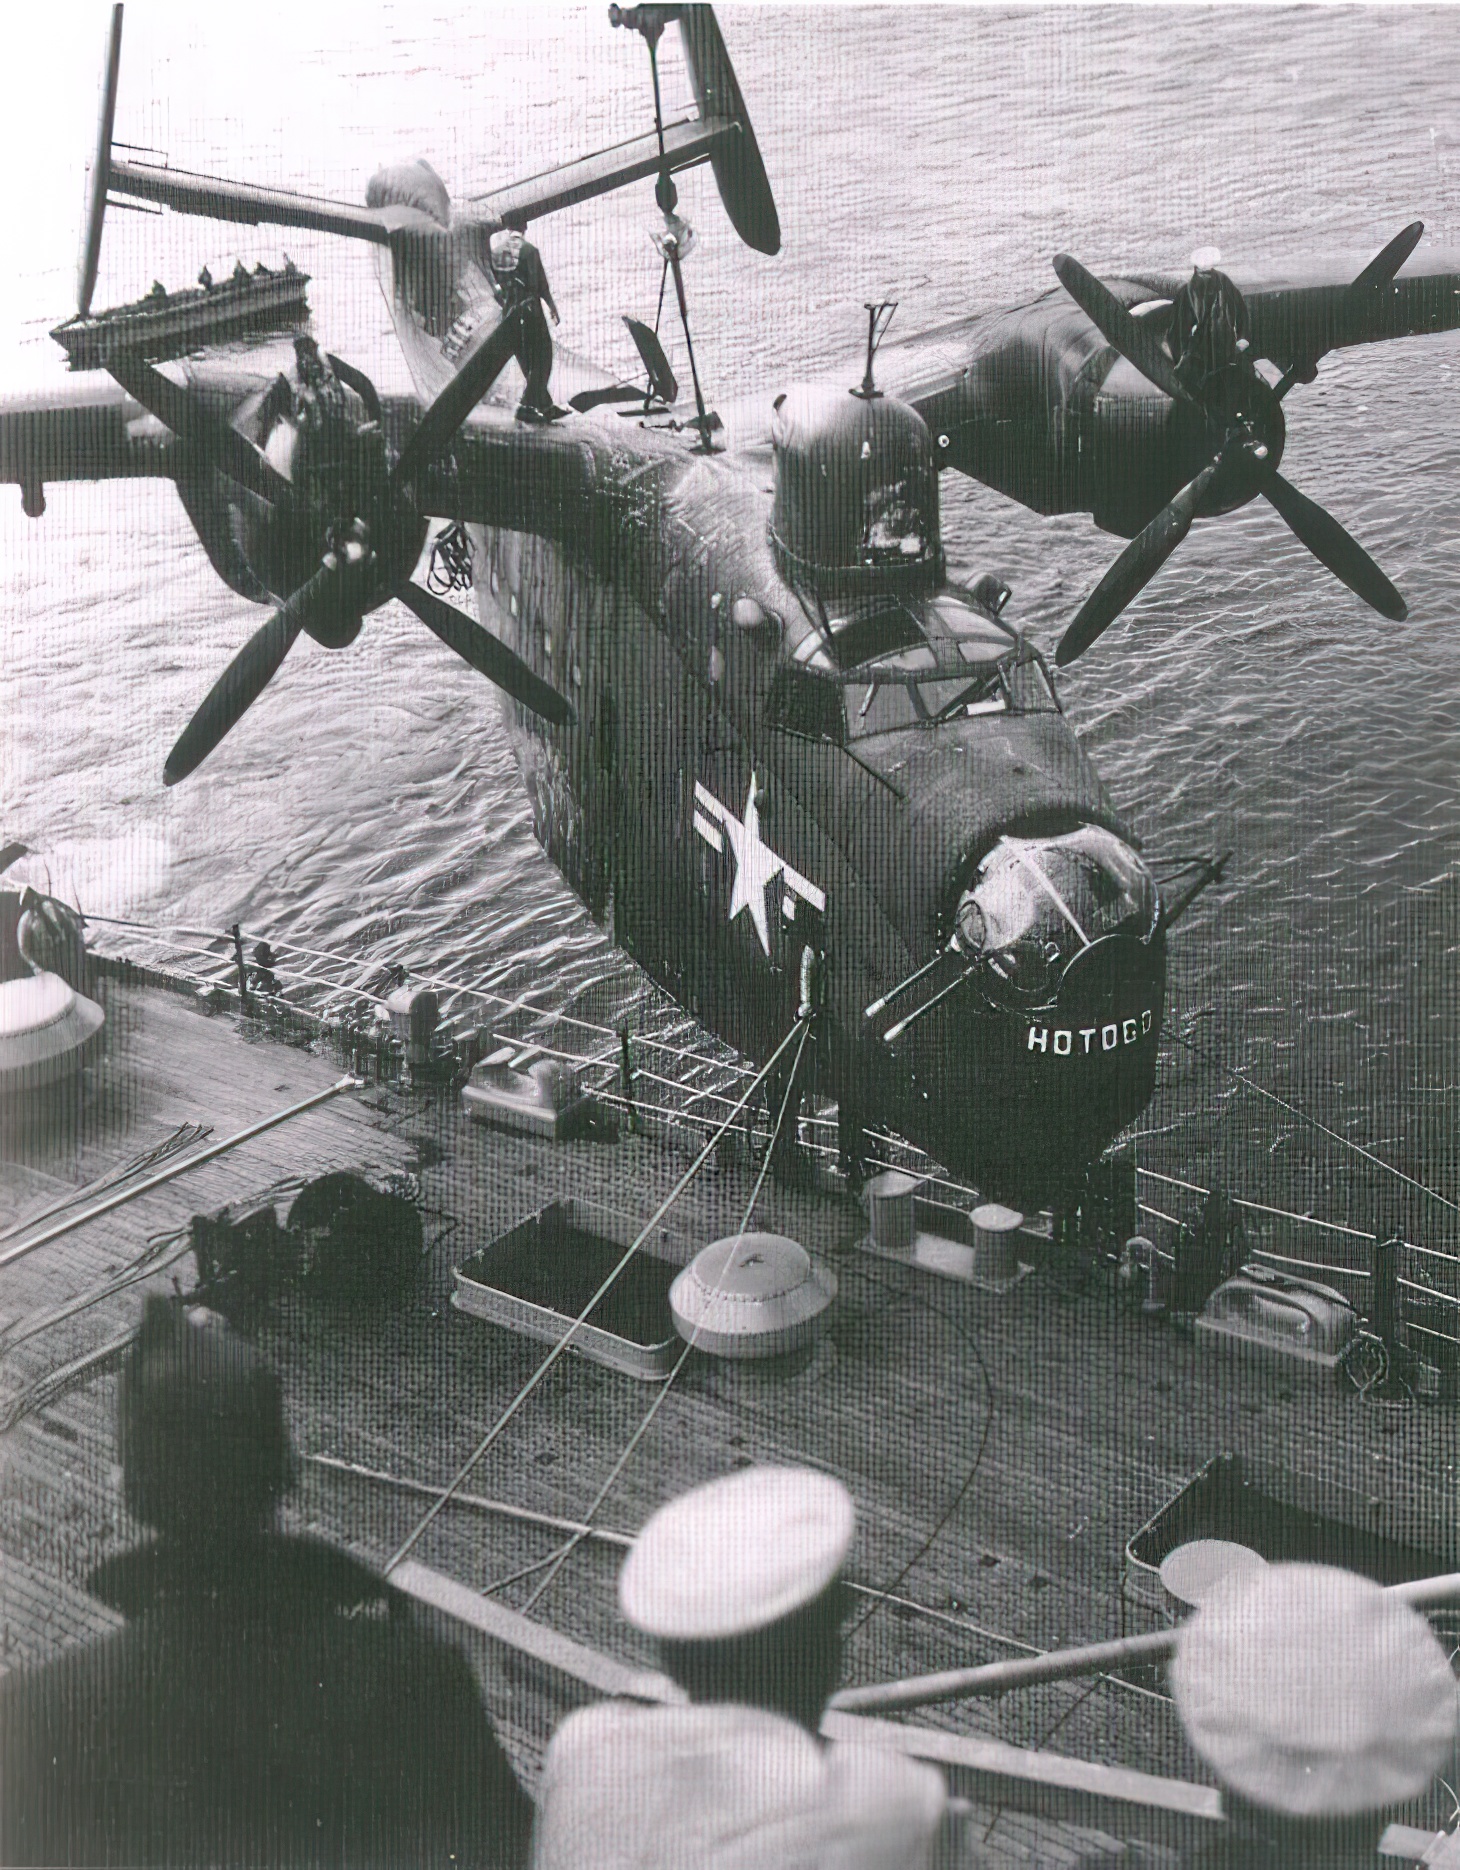 A United States Navy PBM Mariner flying boat of Fleet Air Wing 6 is hoisted aboard the U.S. Navy seaplane tender USS Curtiss (AV-4) after returning from a mine-hunting patrol off North Korea during the Korean War